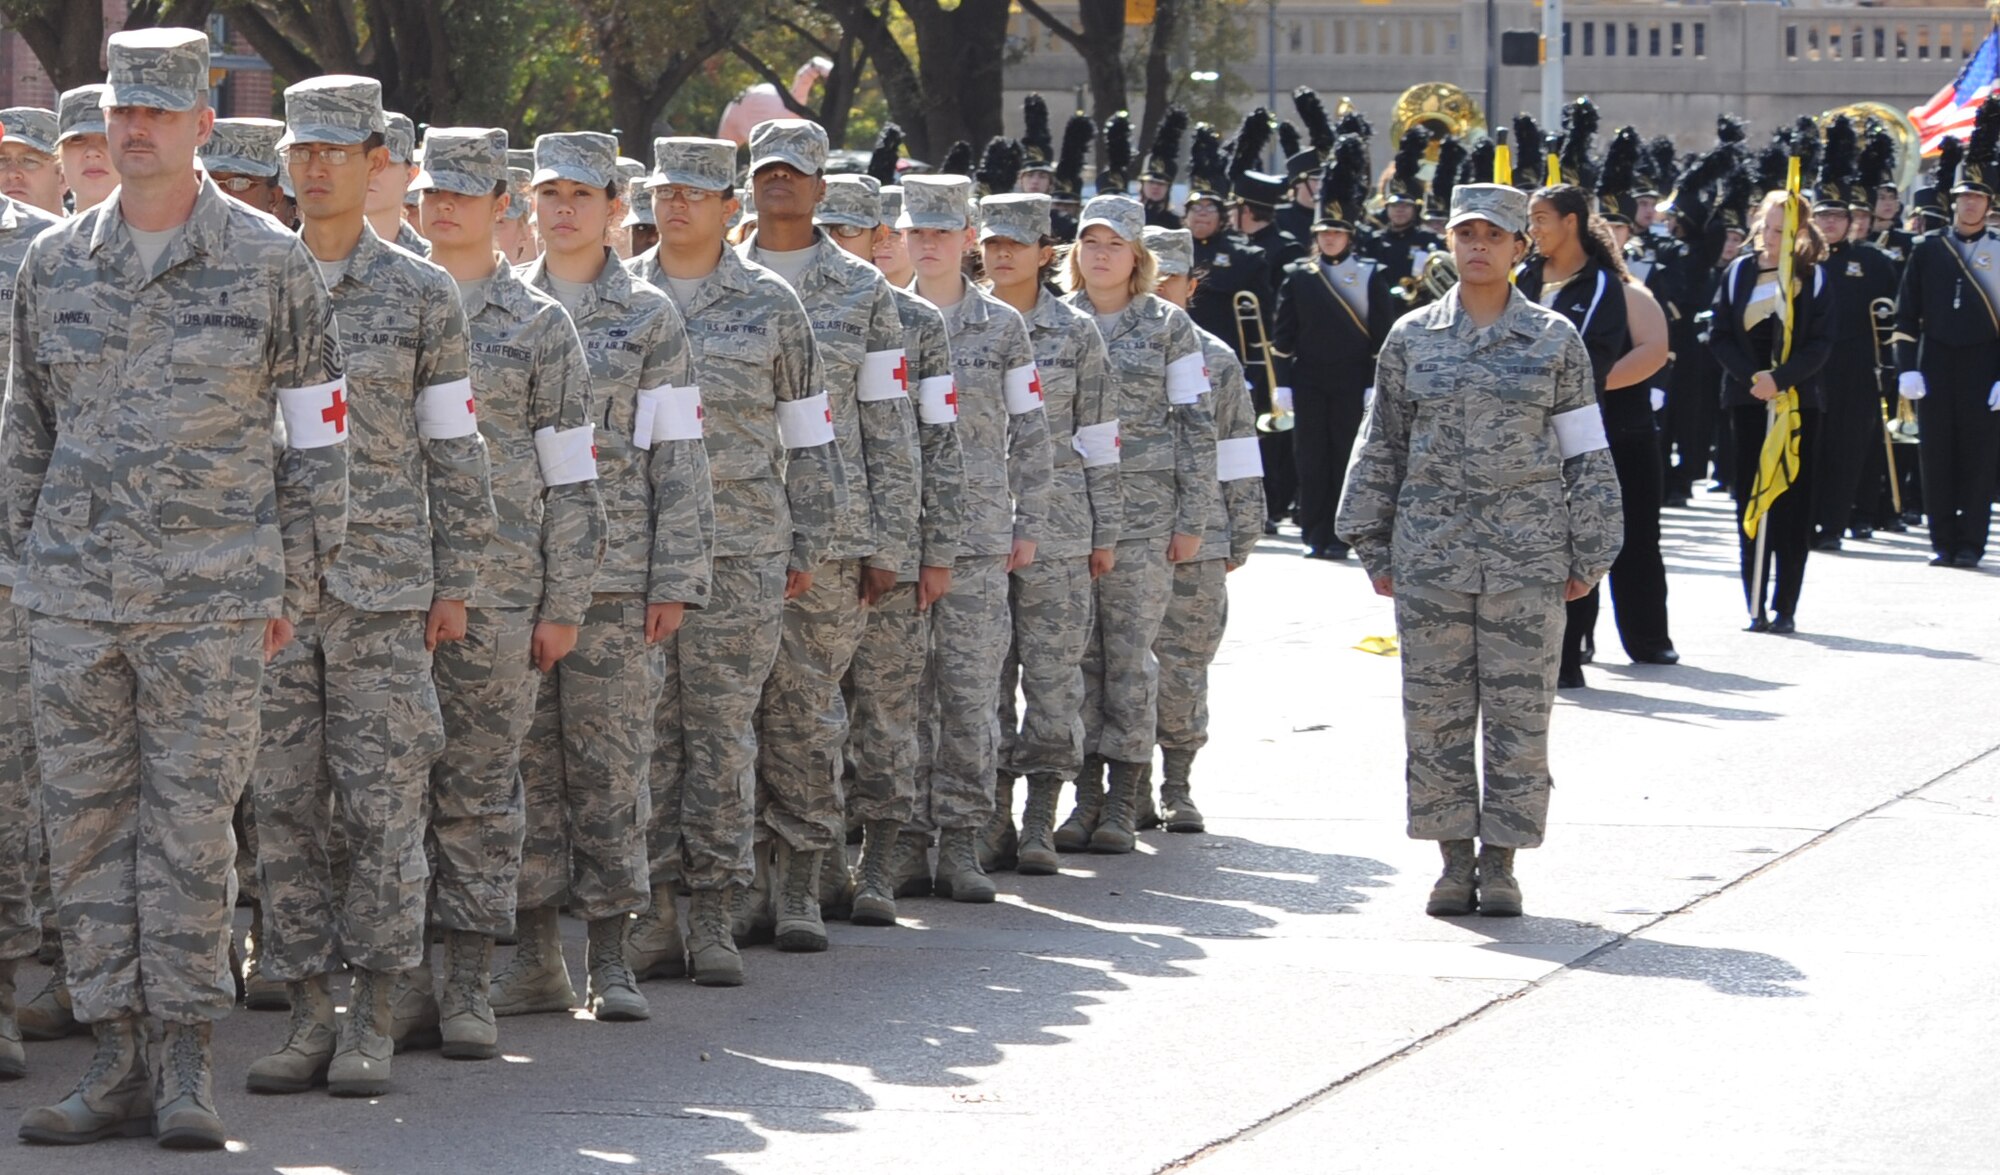 Airmen from the 7th Medical Group stand at attention during the national anthem at the Abilene Veterans Day Parade Nov. 10, 2012, in Abilene, Texas. Dyess Air Force Base Airmen marched alongside local Junior Reserve Officers’ Training Corps cadets and marching bands in Abilene's annual parade to commemorate the service military members provide to the United States. (U.S. Air Force photo by Airman 1st Class Peter Thompson/ Released)